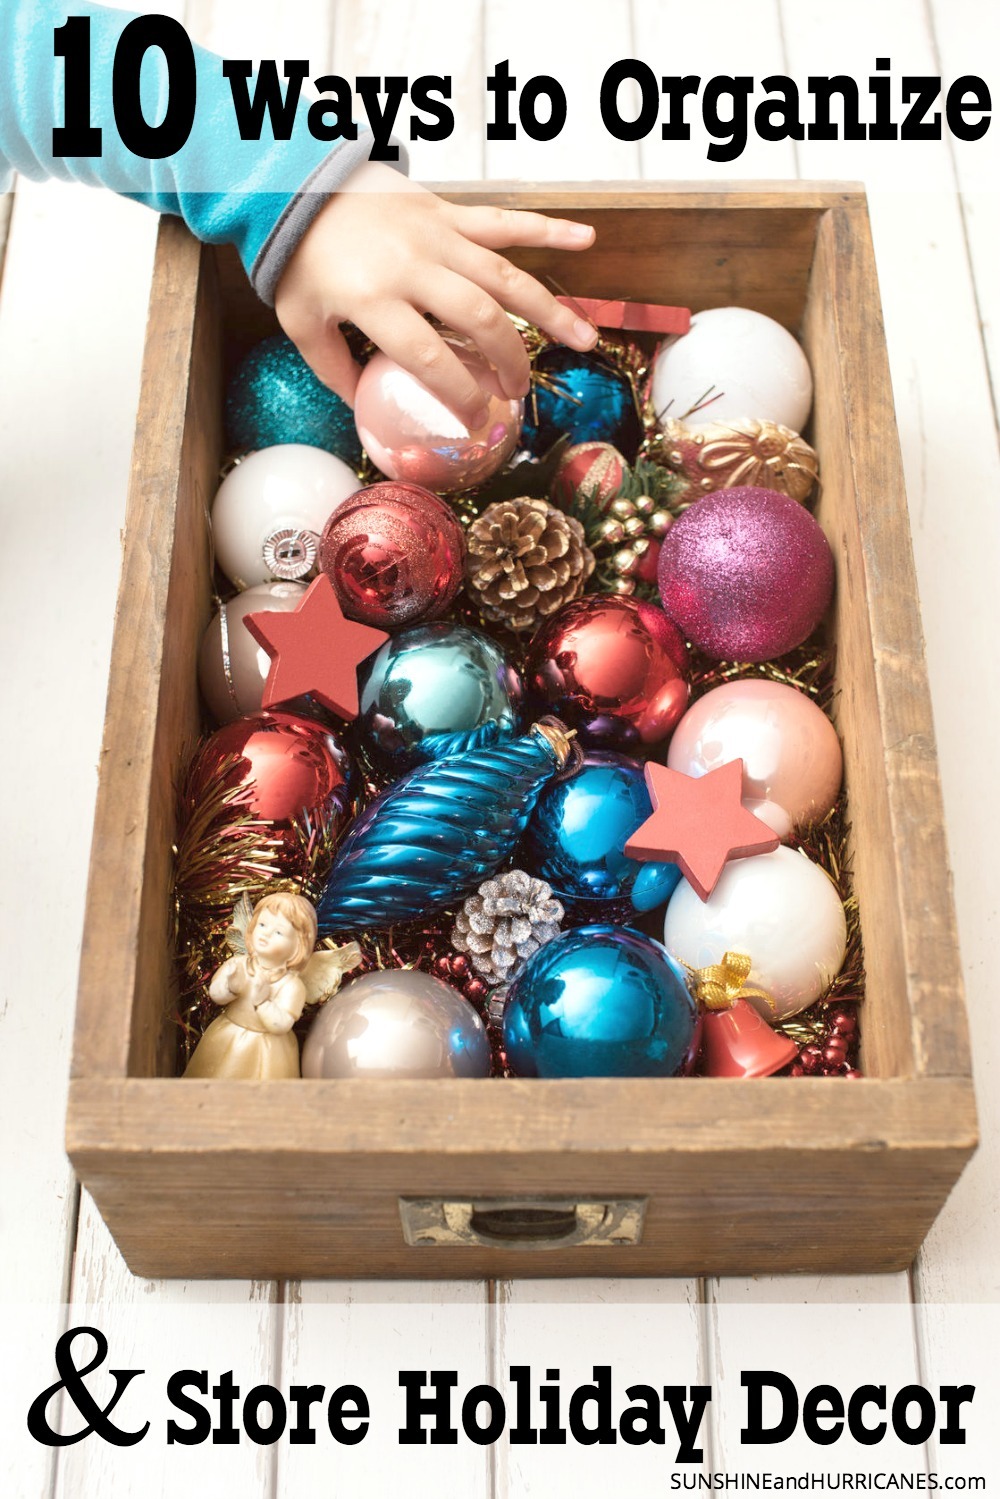 Looking for solutions to get those precious kid made ornaments and other holiday decorations organized and safe? There are lots of affordable and easy options to choose from that will make storing your holiday decor for less of a chore. 10 Ways to Organize and Store Holiday Decor. SunshineandHurricanes.com